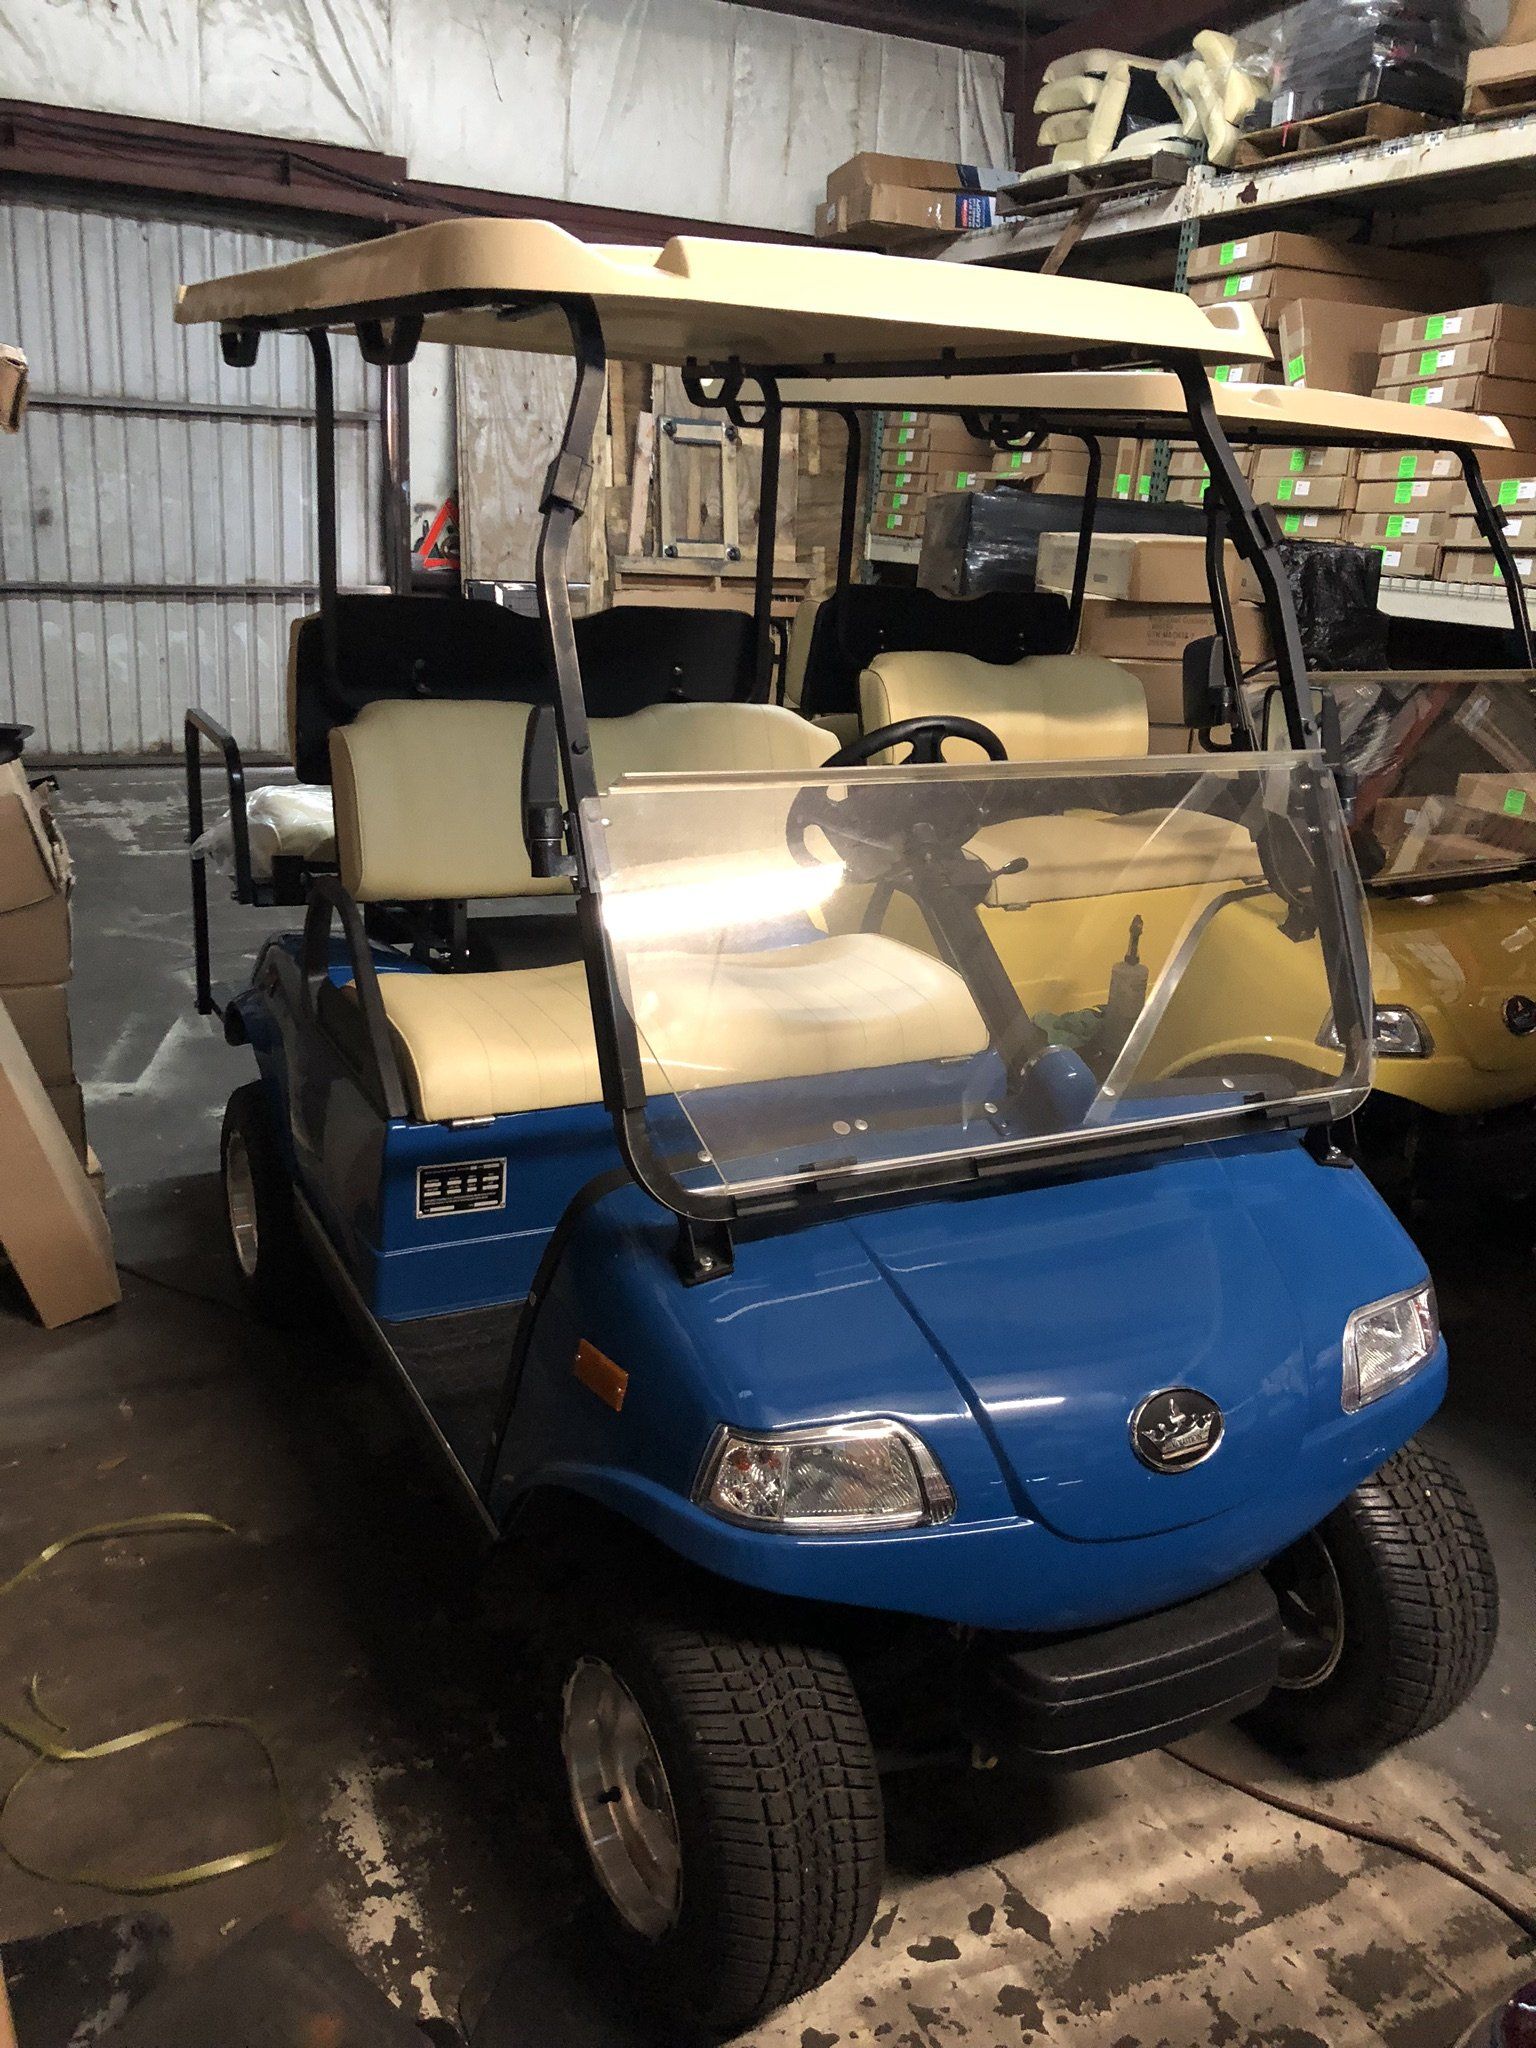 Golf cart with red and blue design